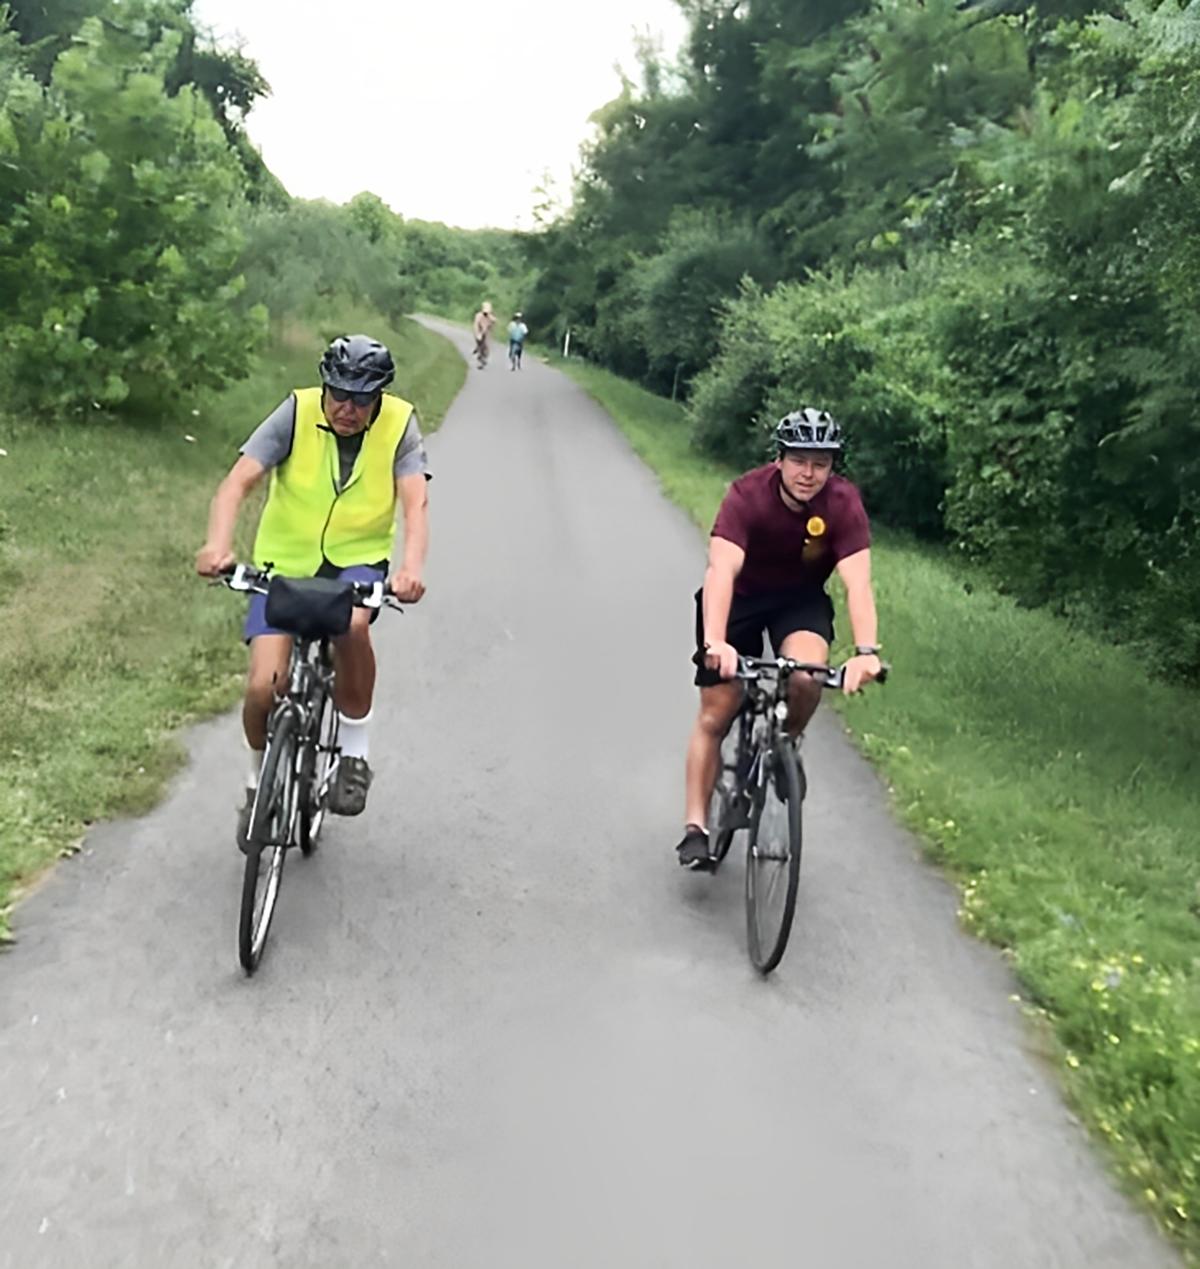 Mr. Eckenrode riding on the trail with his grandson, Nick Rendulic. (Courtesy of Susan Rendulic via <a href="https://nsga.com/">National Senior Games</a>)